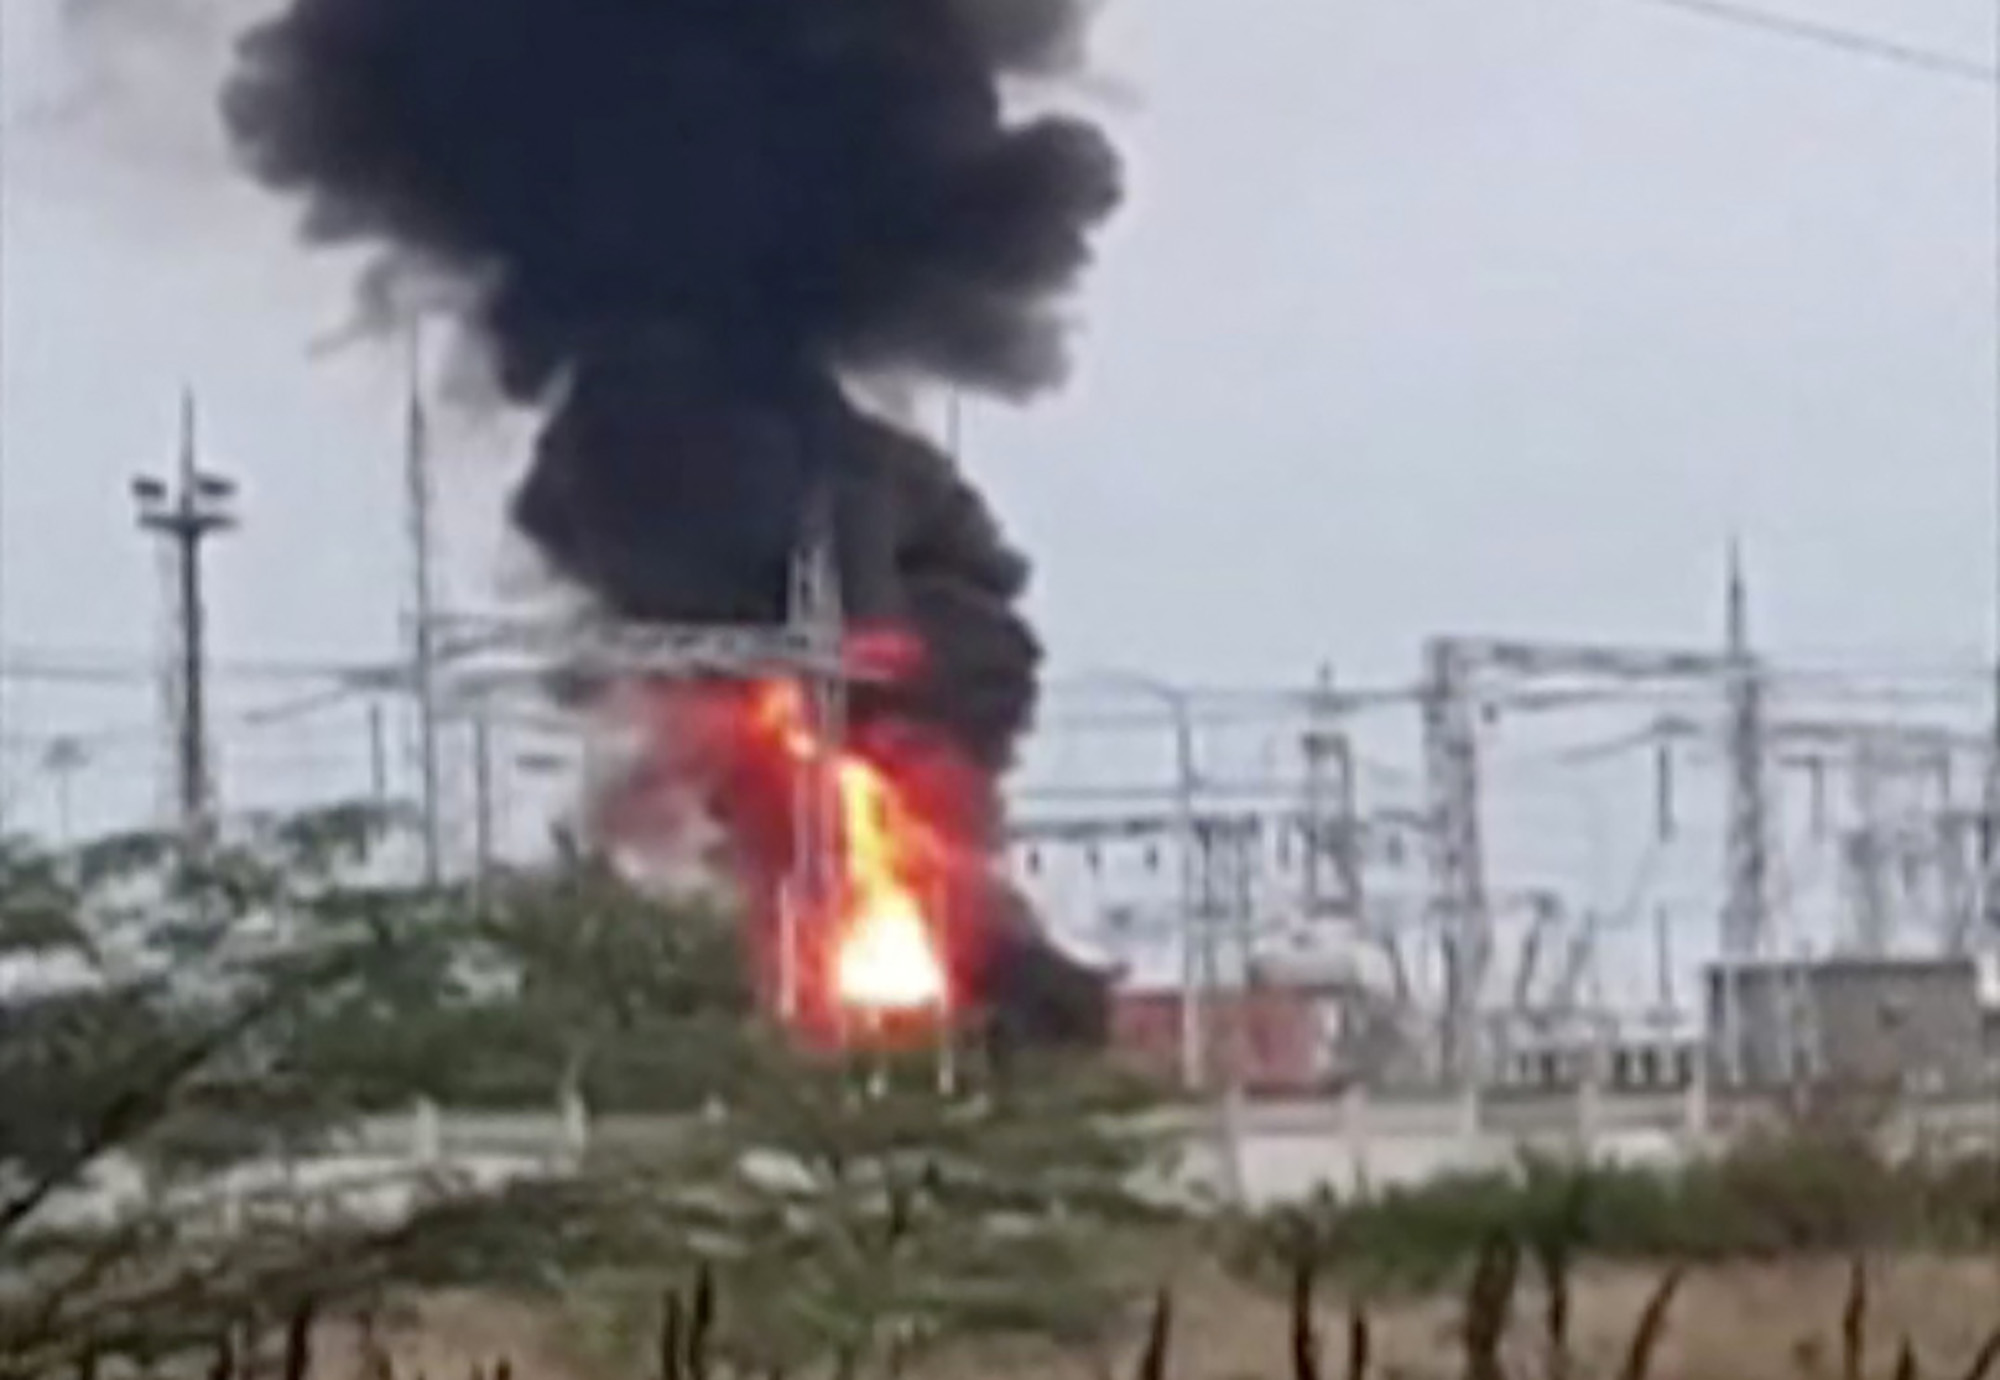 Smoke rises above a transformer electric substation which caught fire after a blast in the Dzhankoi district, Crimea on August 16. 